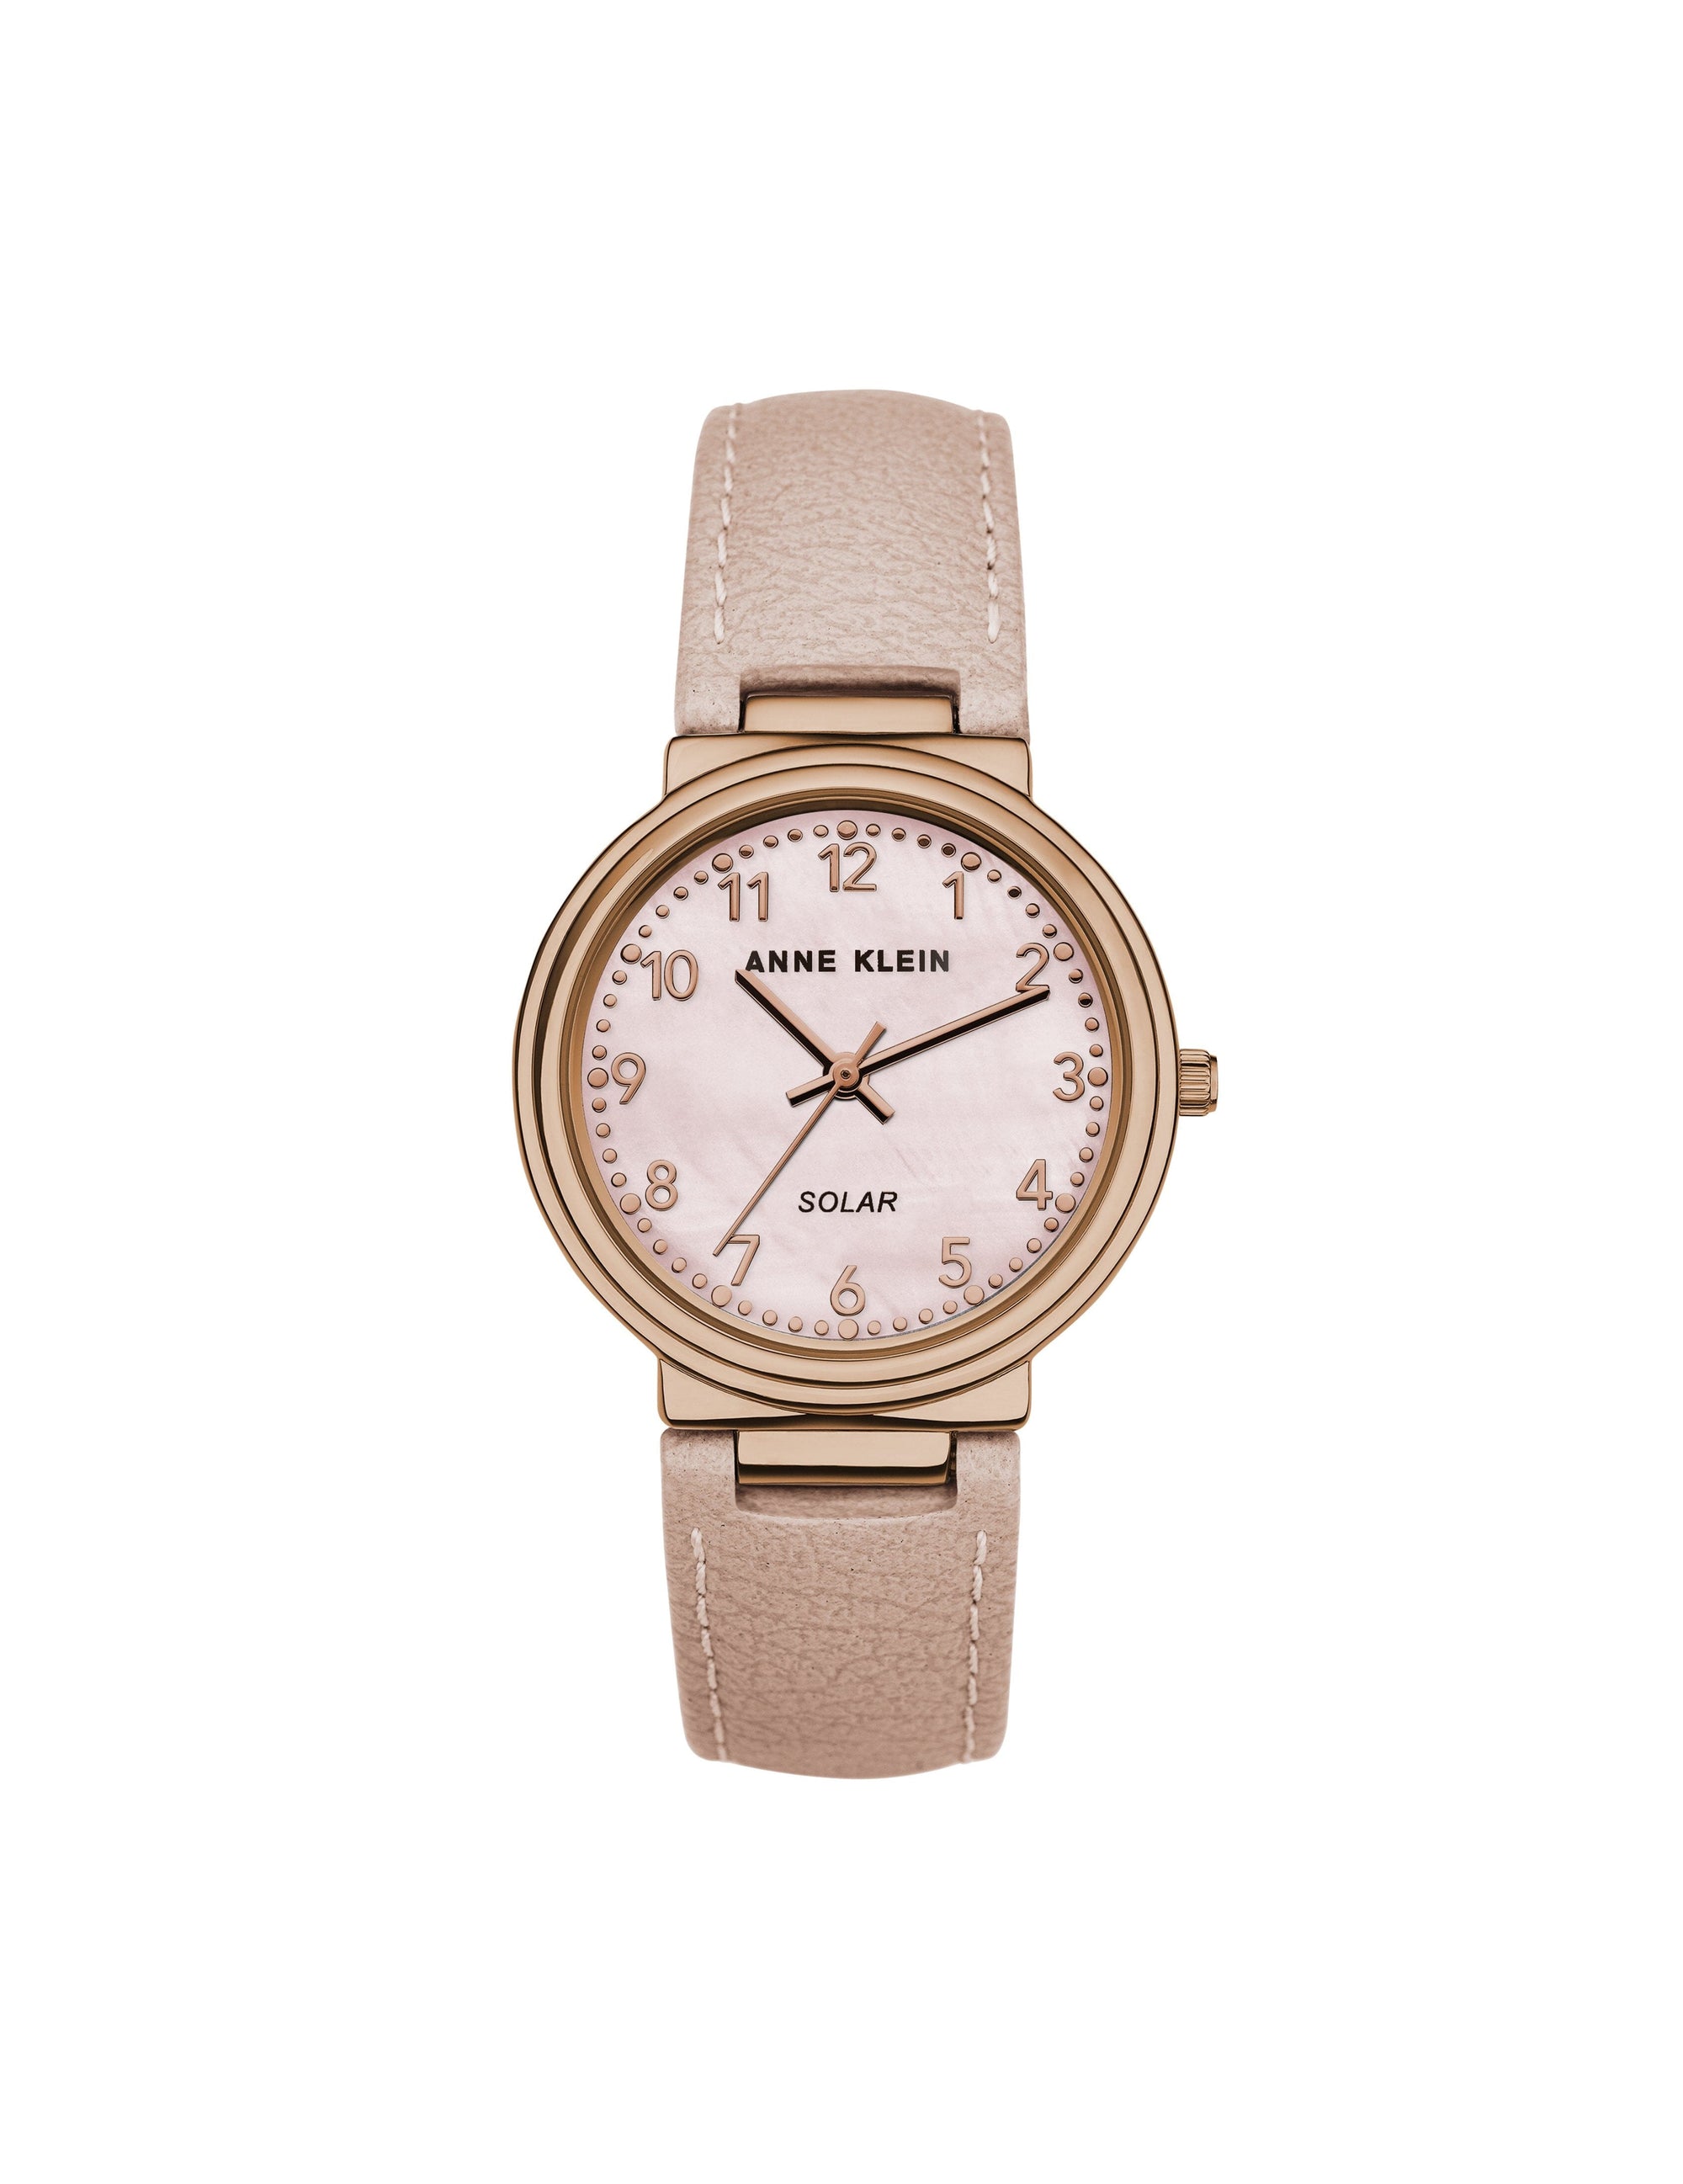 considered solar powered easy read dial blush pink rose gold apple peel leather strap watch